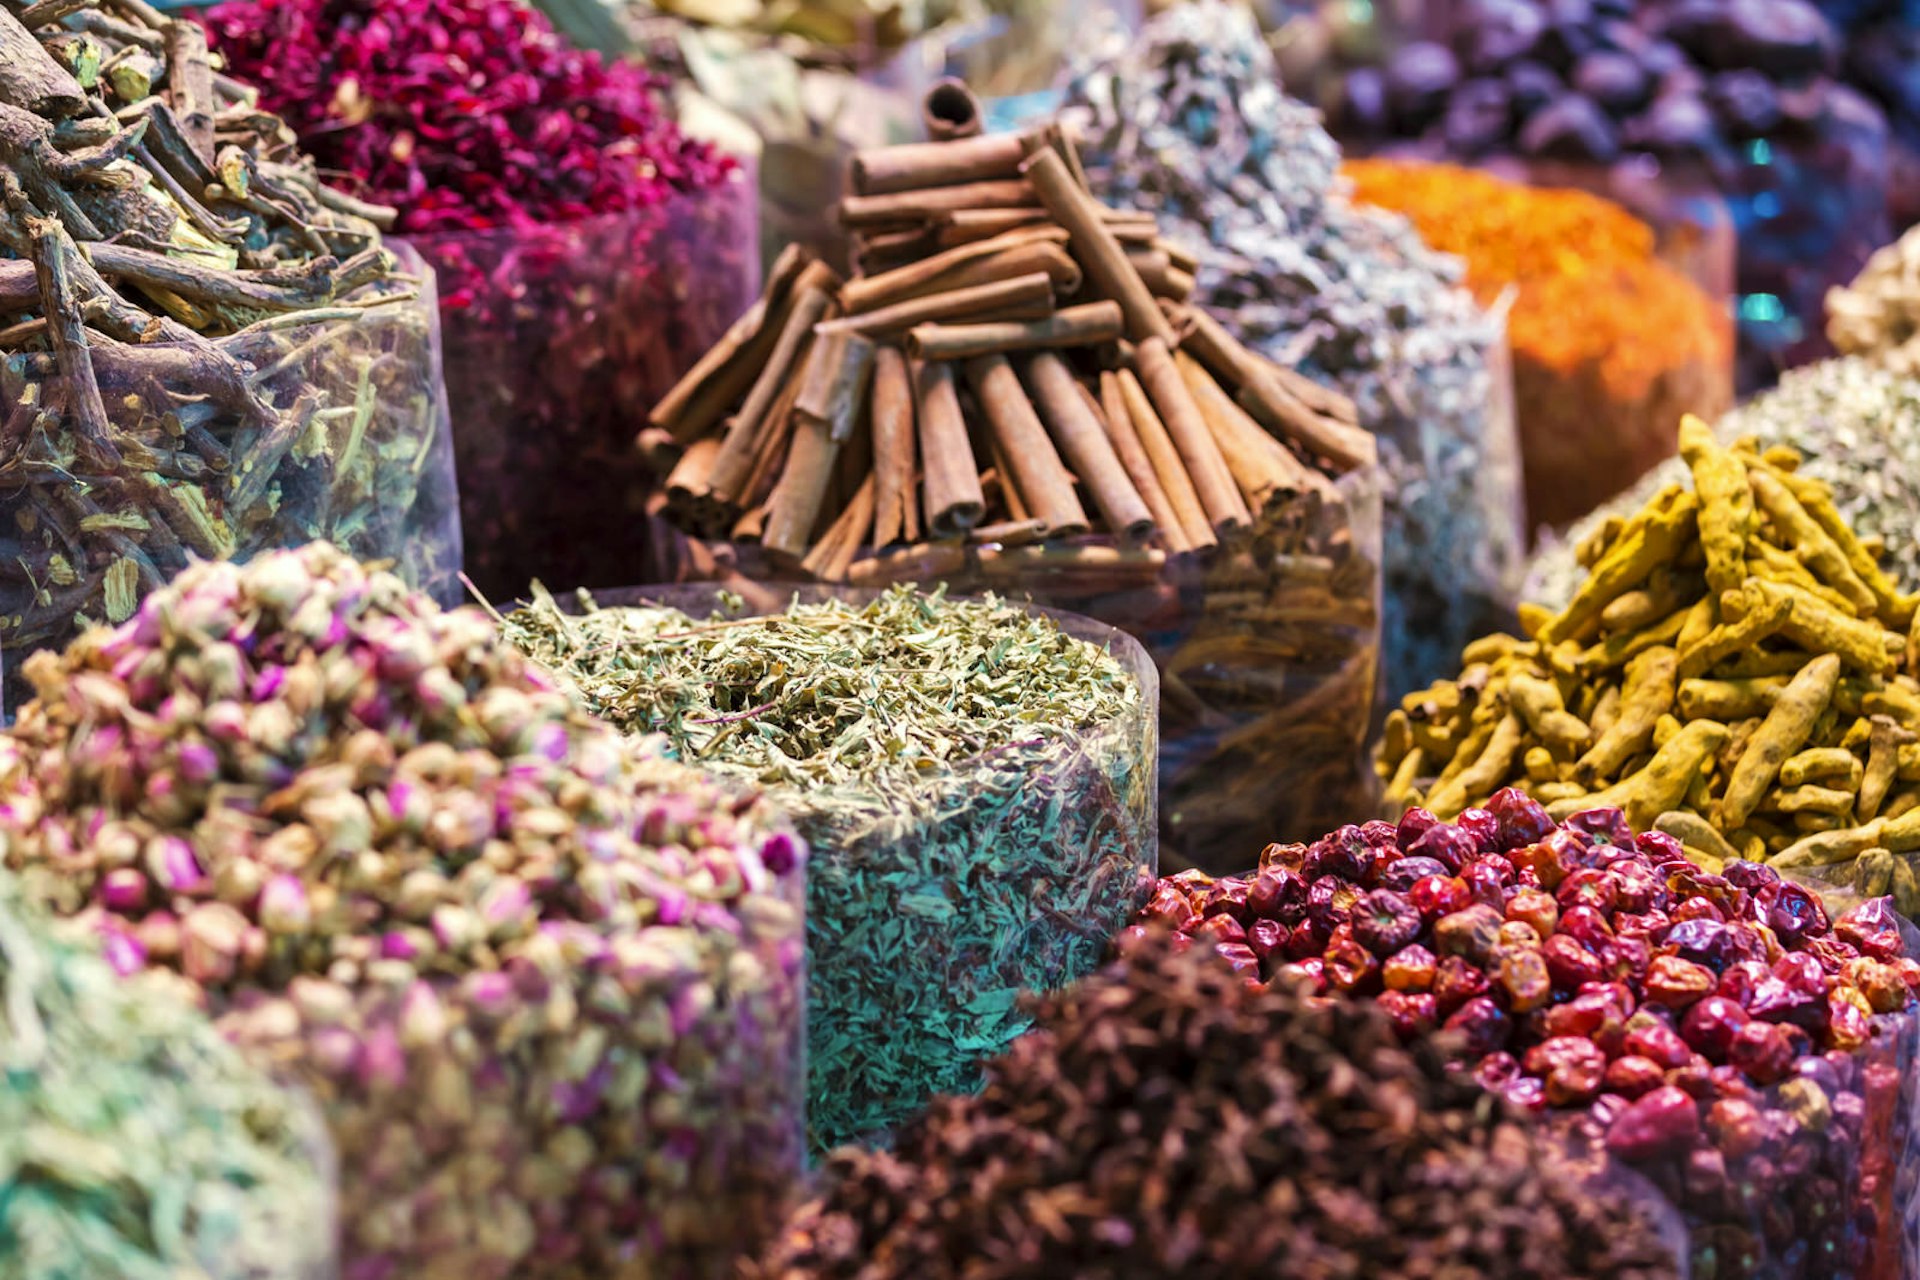 Bag a bargain or two in Dubai's famous spice souk © Matteo Colombo / Getty Images